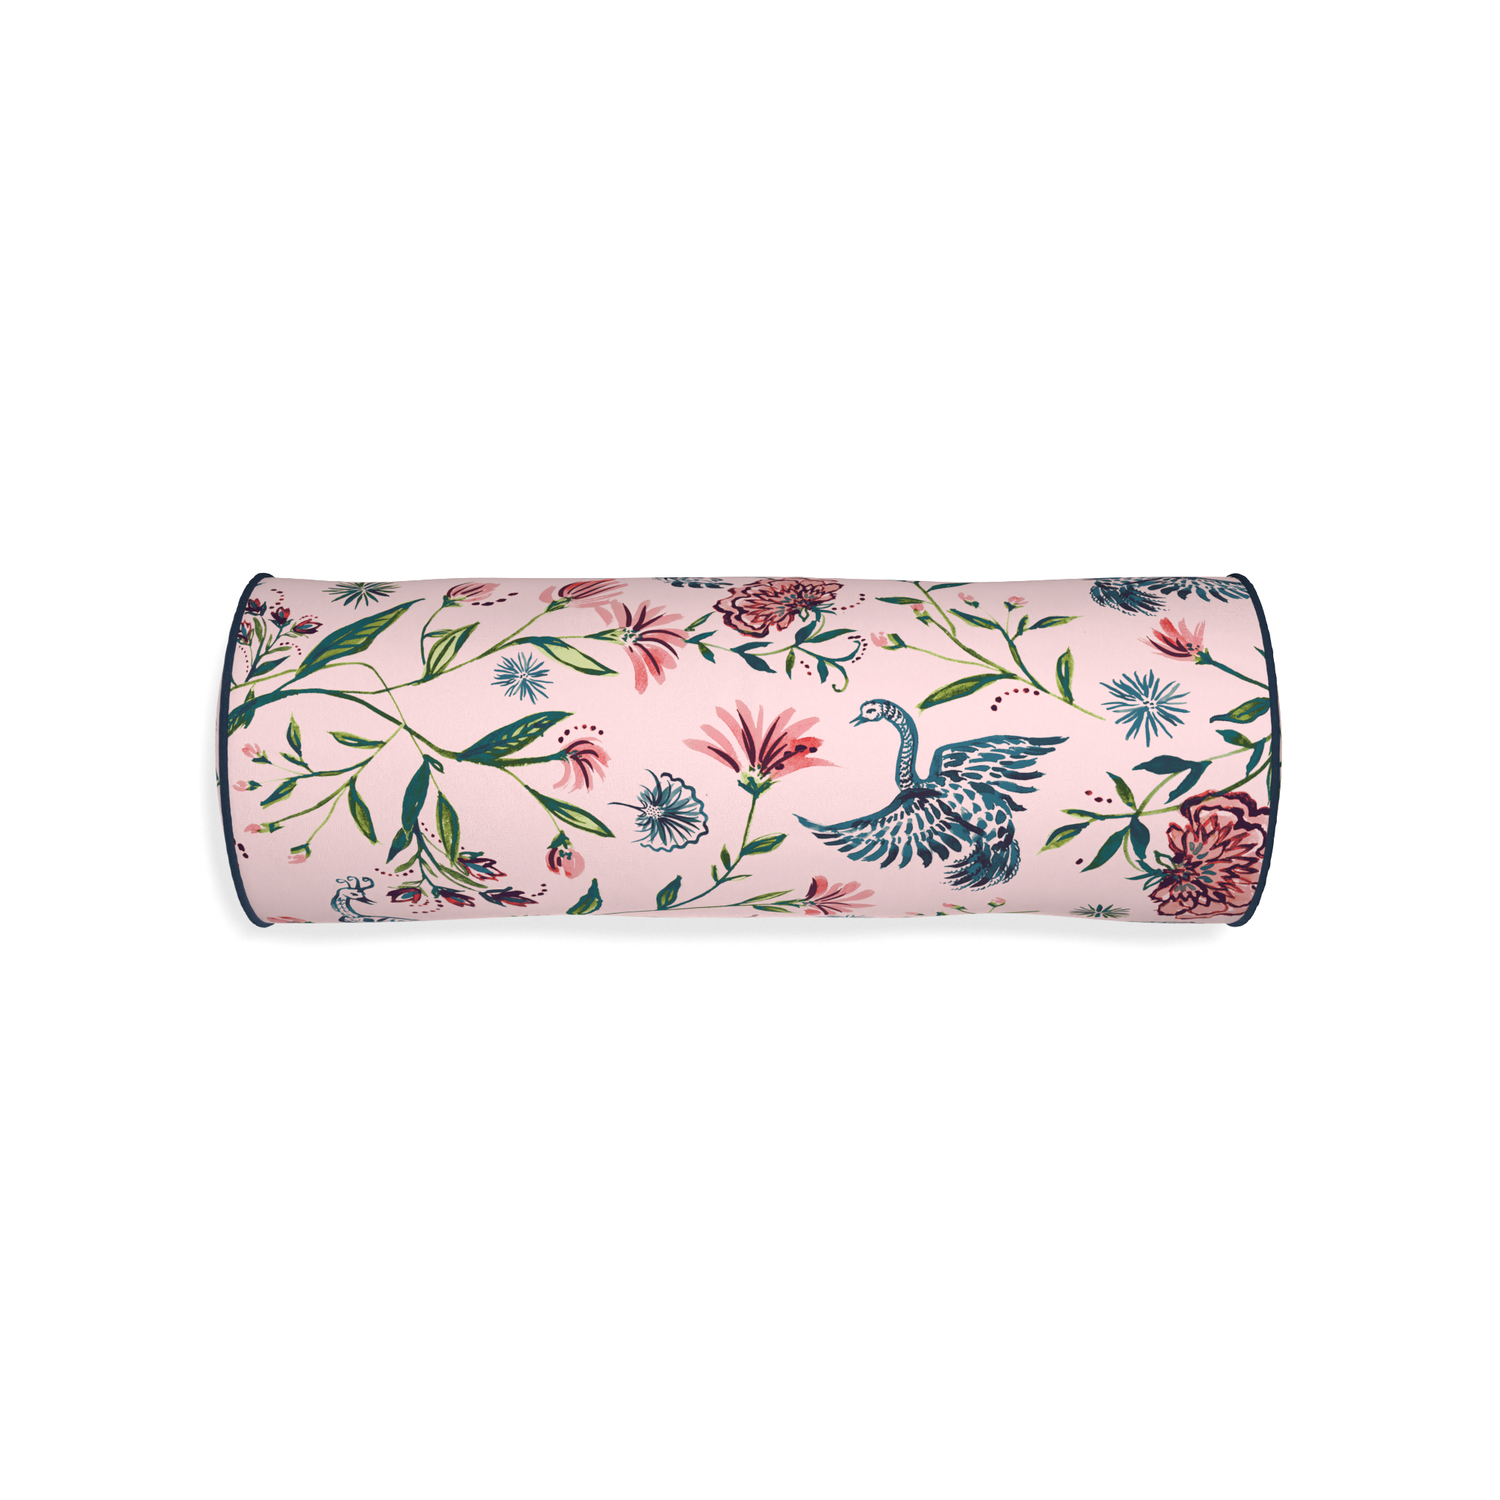 Bolster daphne rose custom rose chinoiseriepillow with c piping on white background